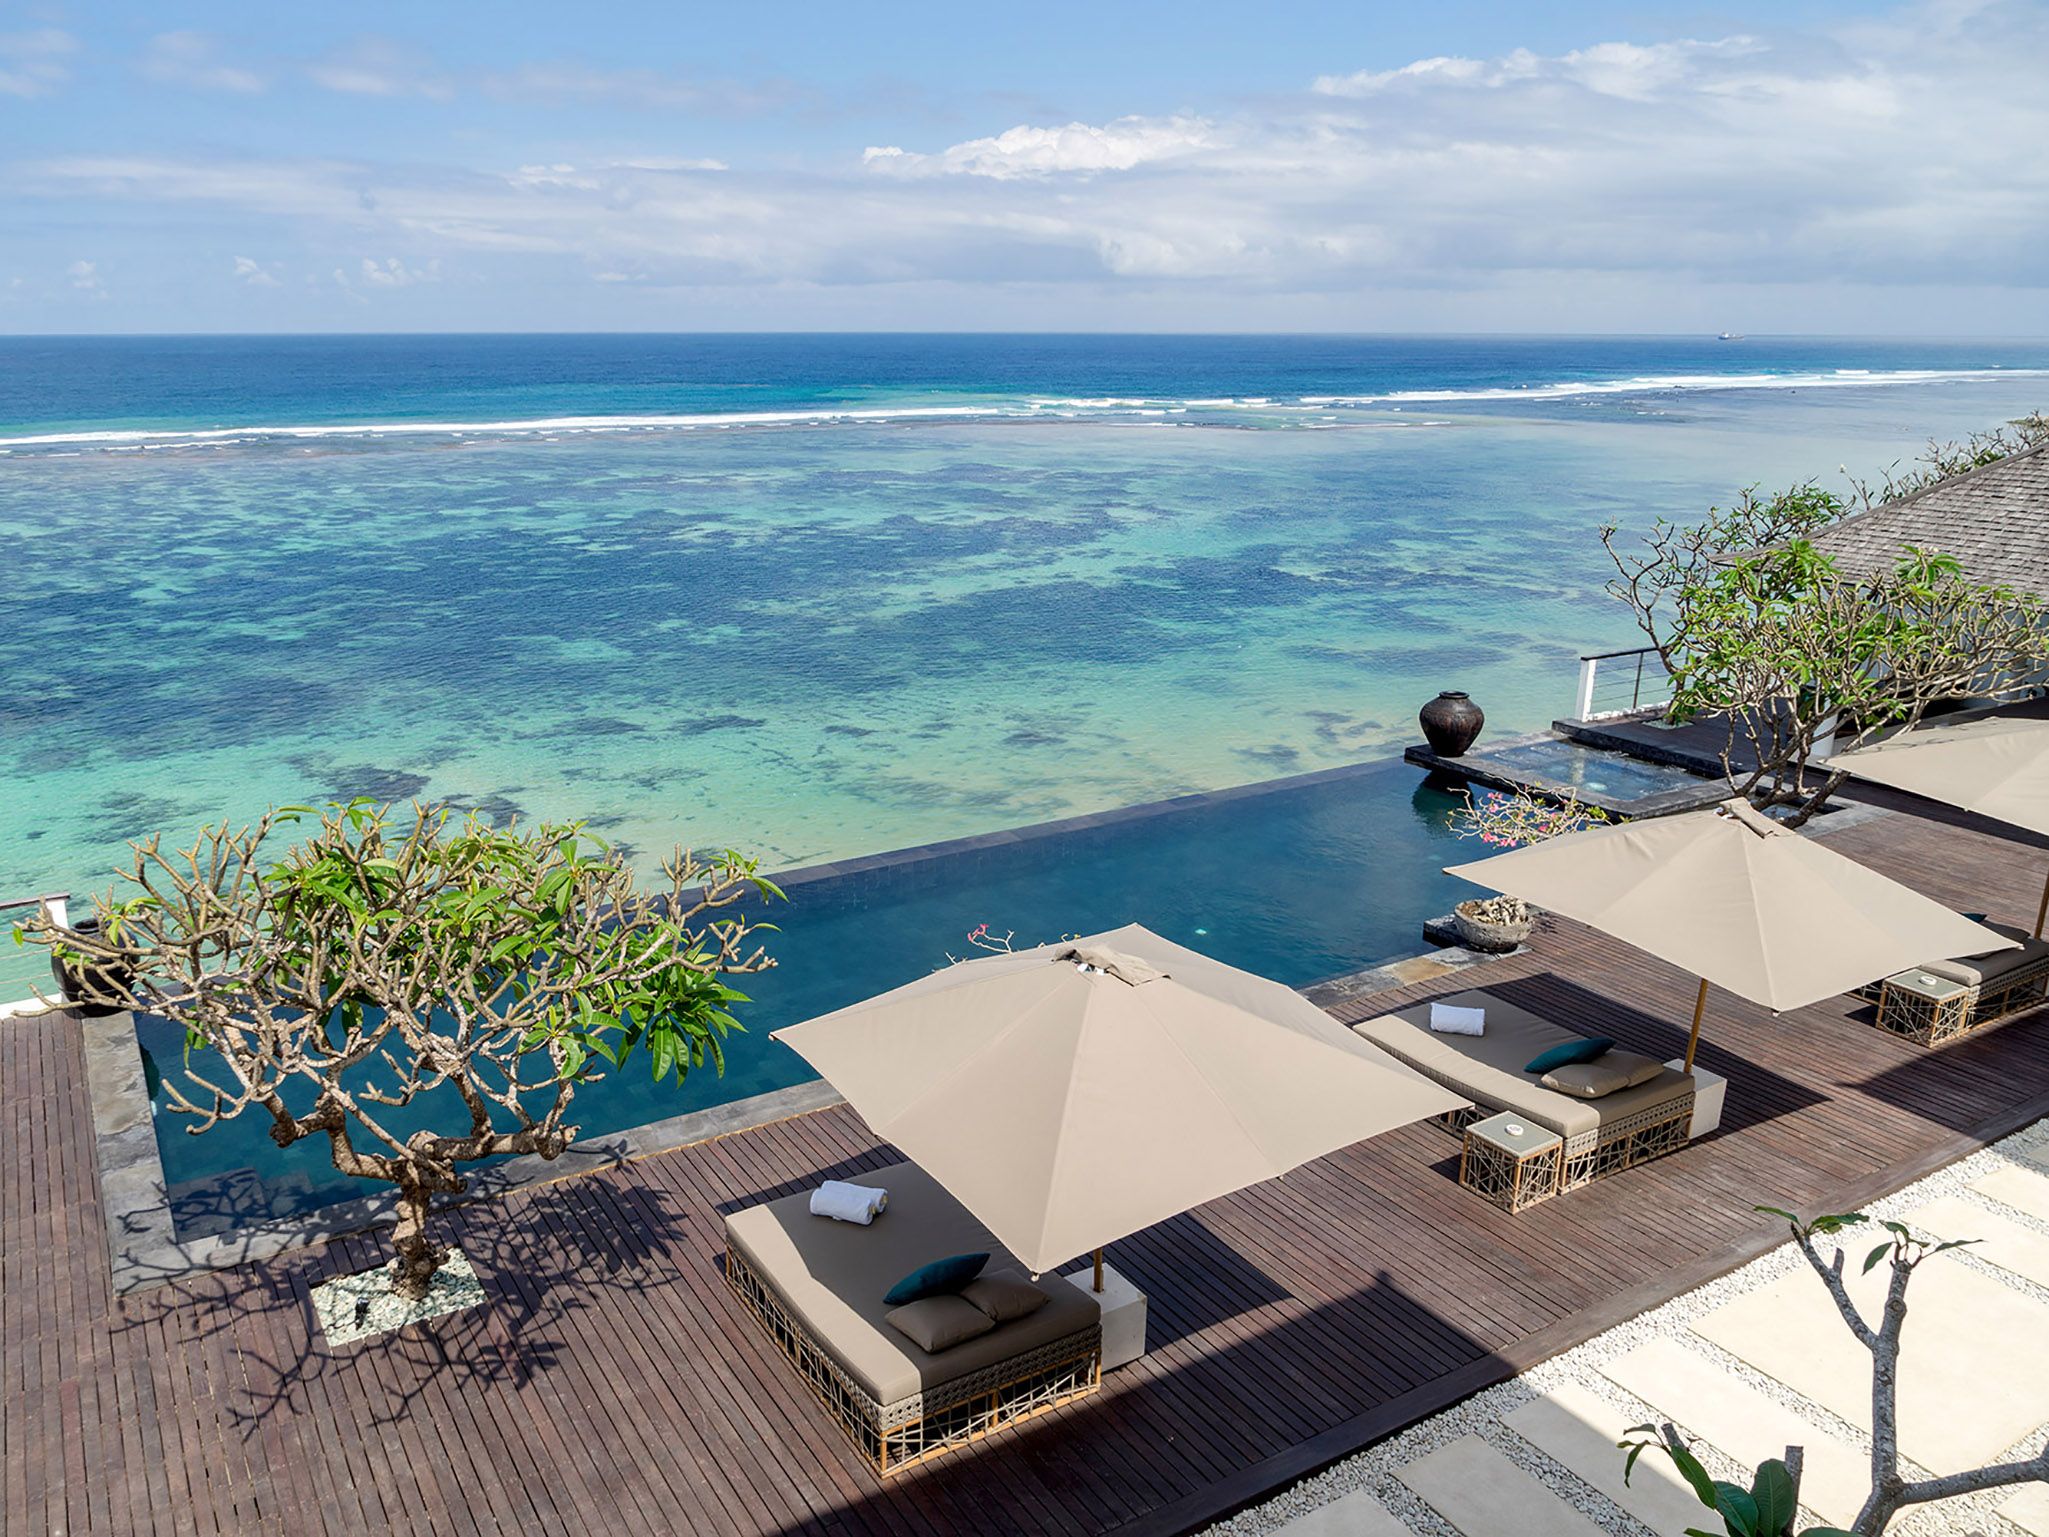 Grand Cliff Nusa Dua - Stunning view from pool